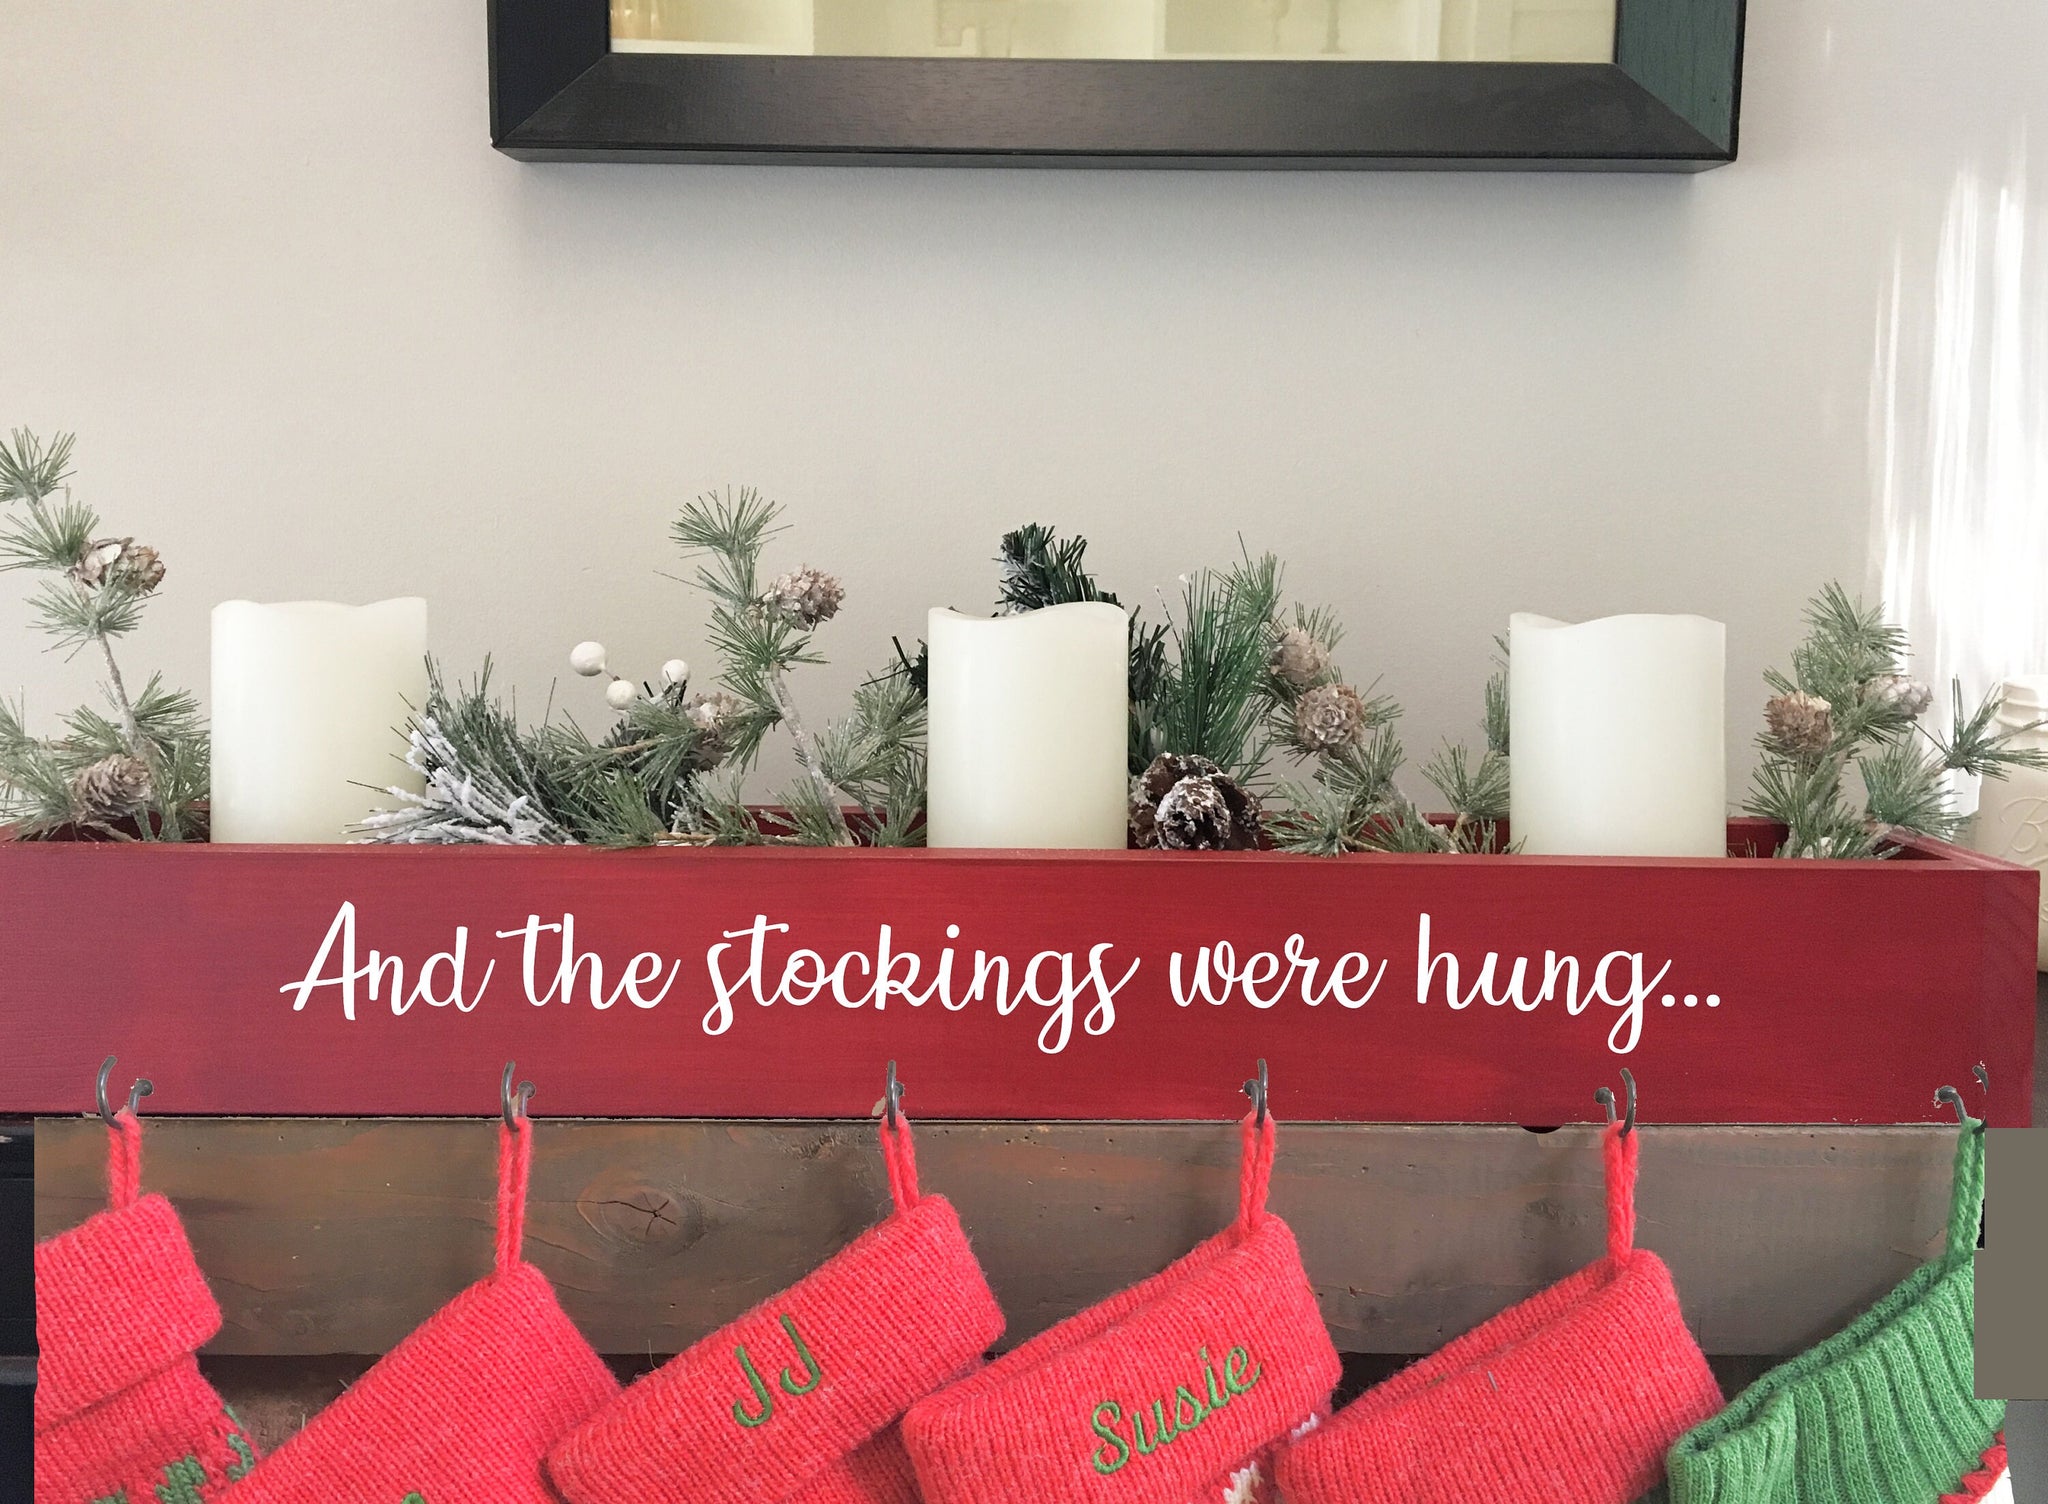 large family stocking holder, wooden box, Christmas, stocking hanger, pet stocking hook, and the stockings were hung